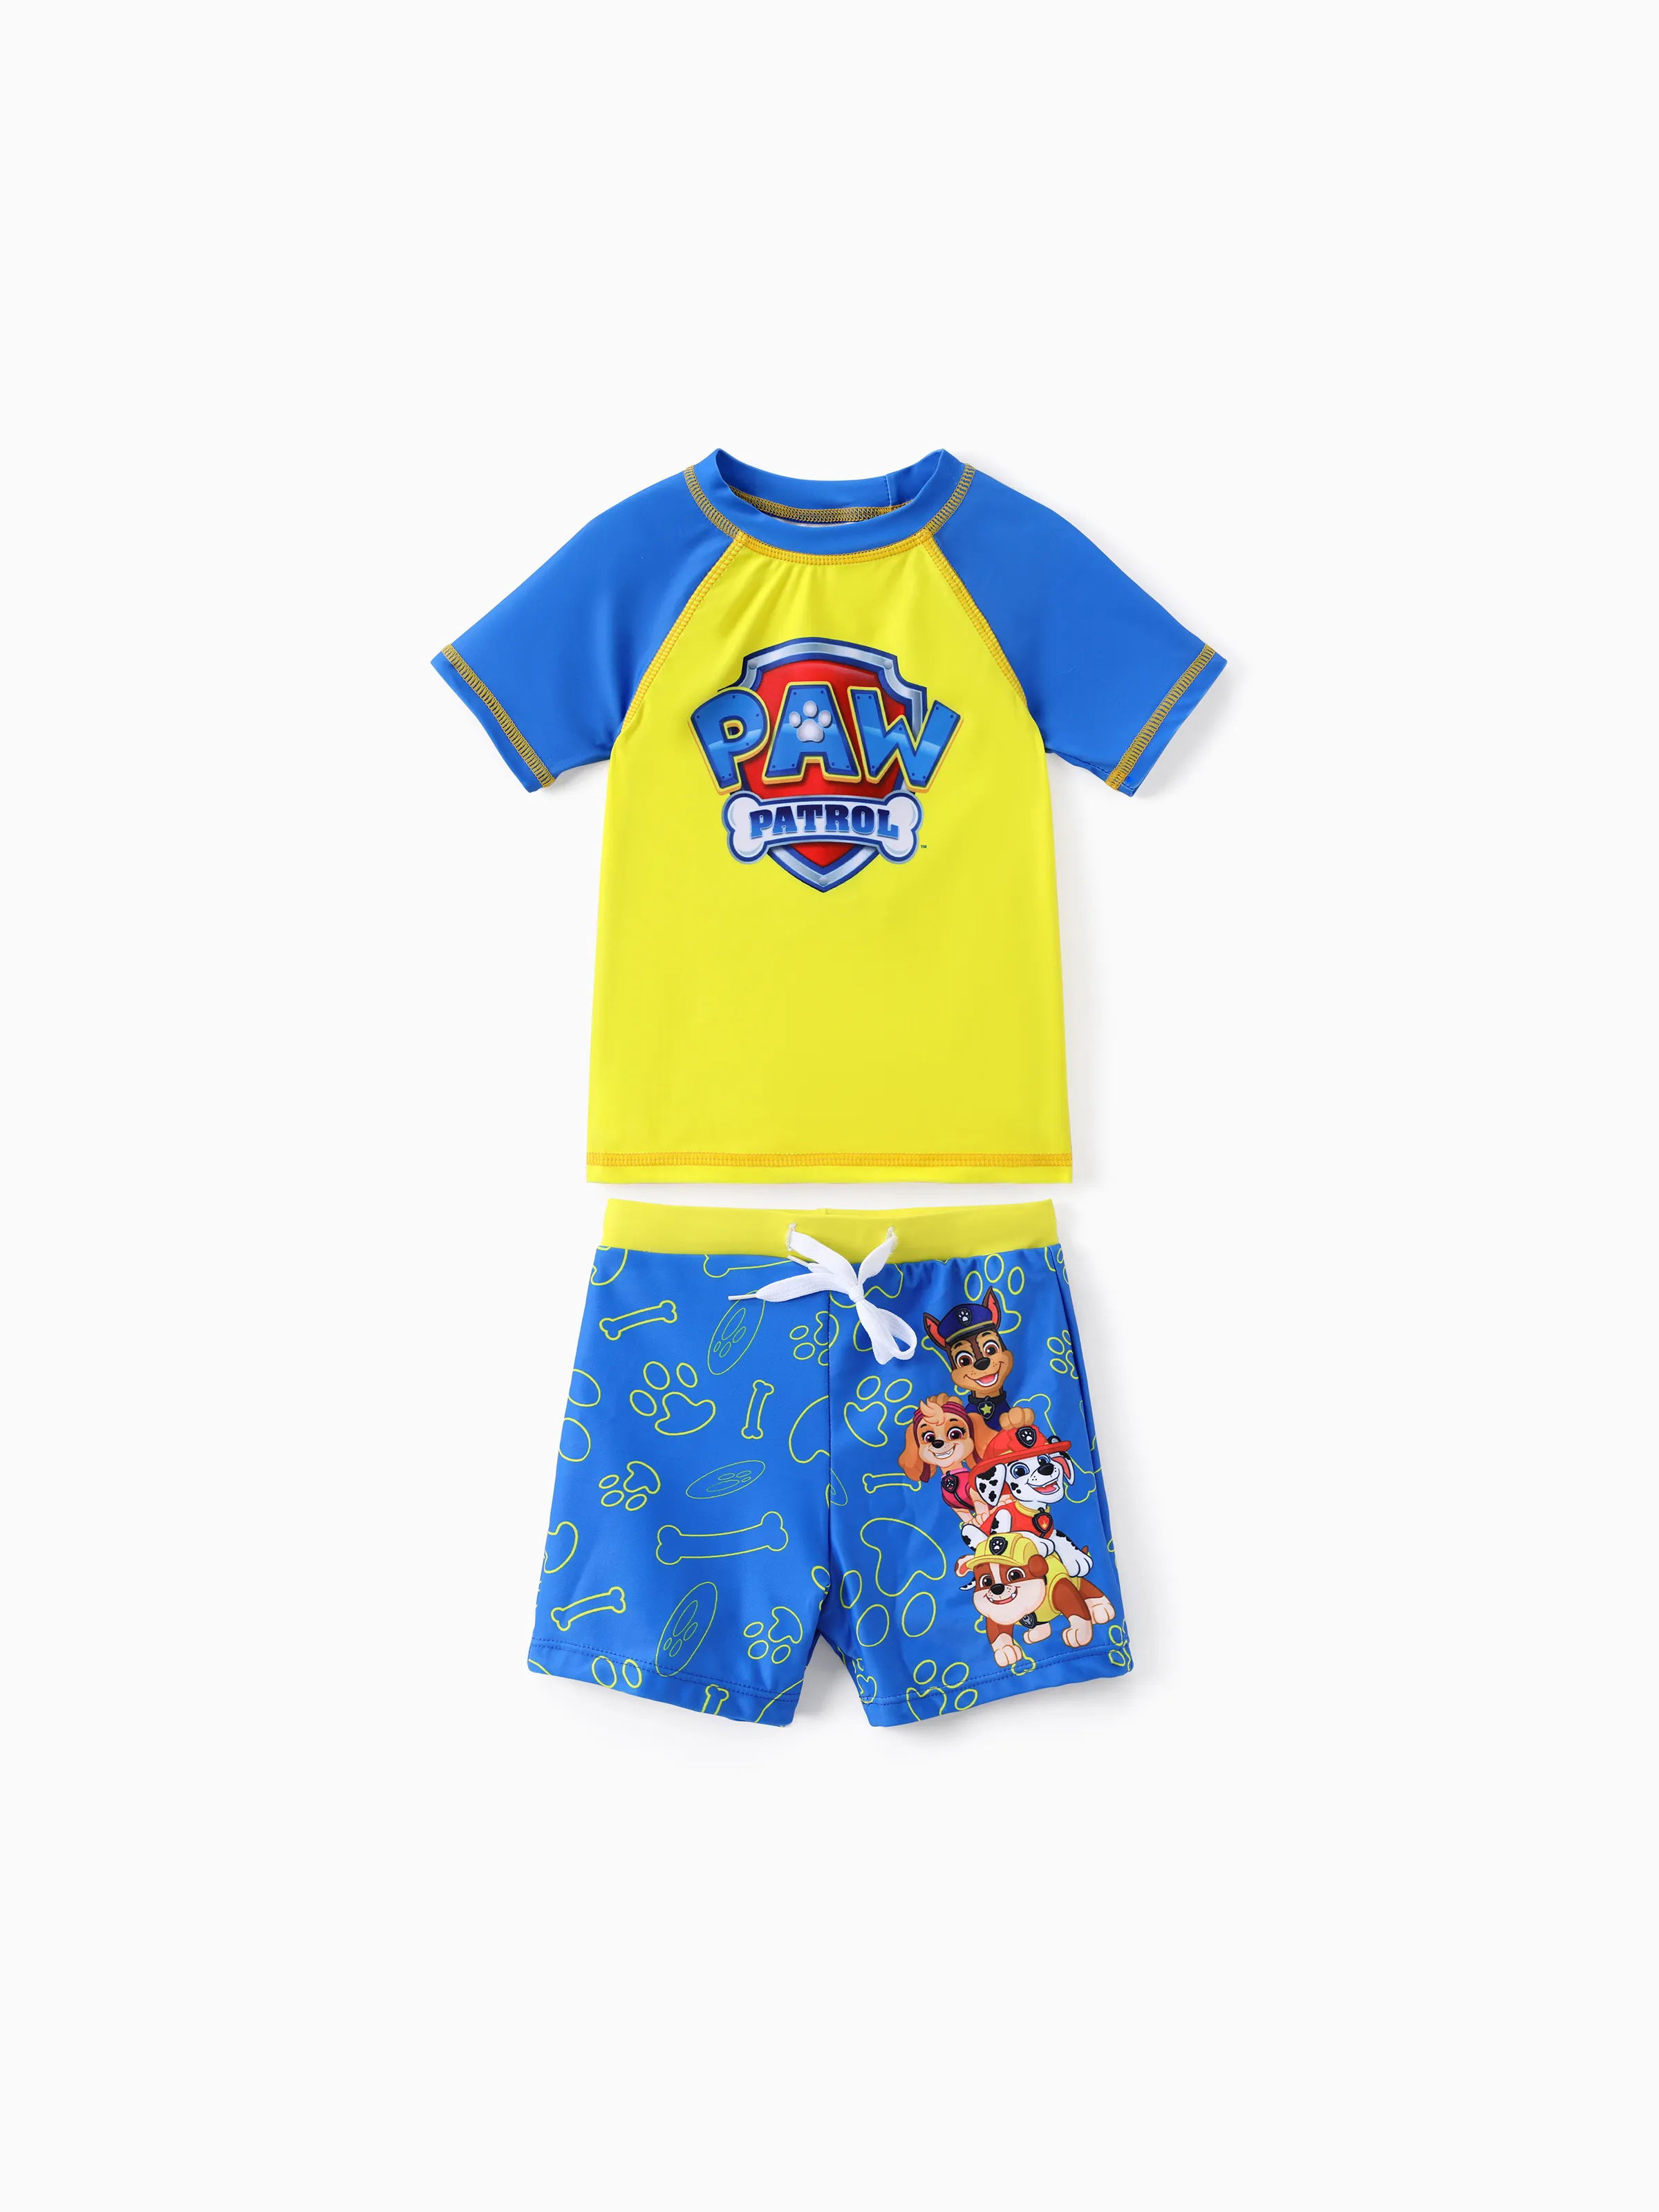 

PAW Patrol Toddler Boy 2pcs Colorblock Tops and Trunks Swimsuit